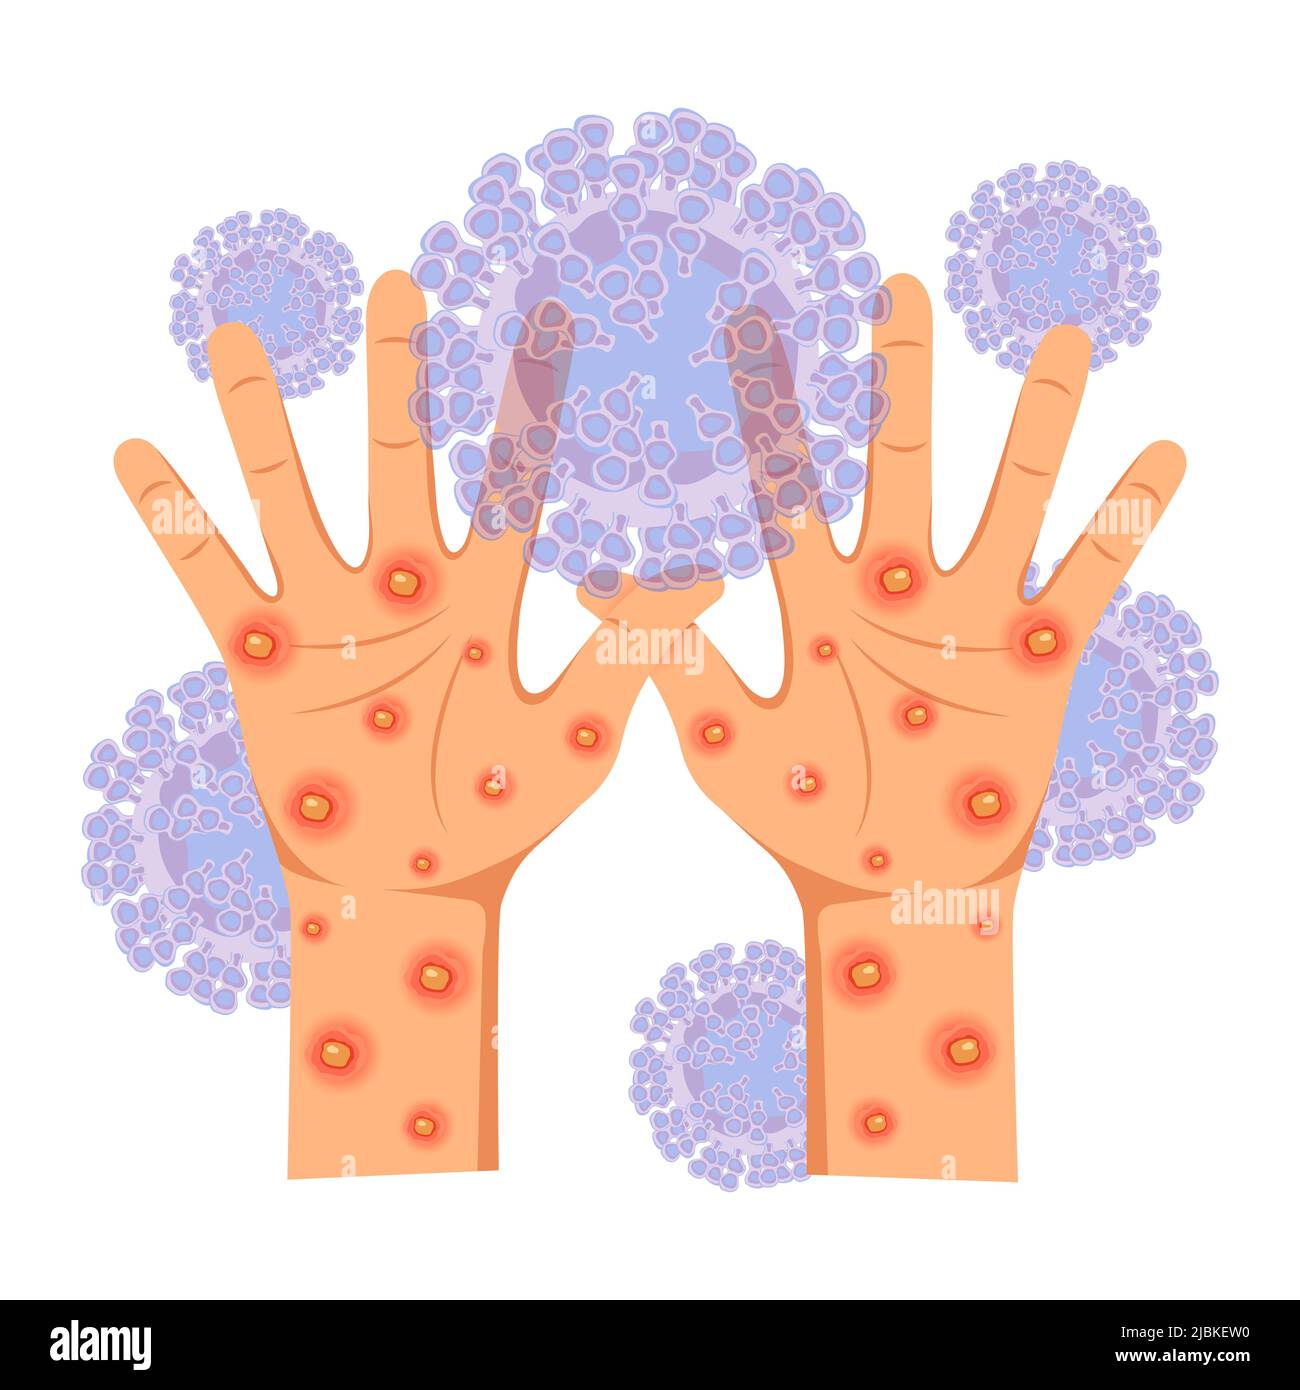 Viral infectious disease Monkeypox virus. Human hands affected by a rash, covered with purulent ulcers and pimples. Vector illustration. Stock Vector